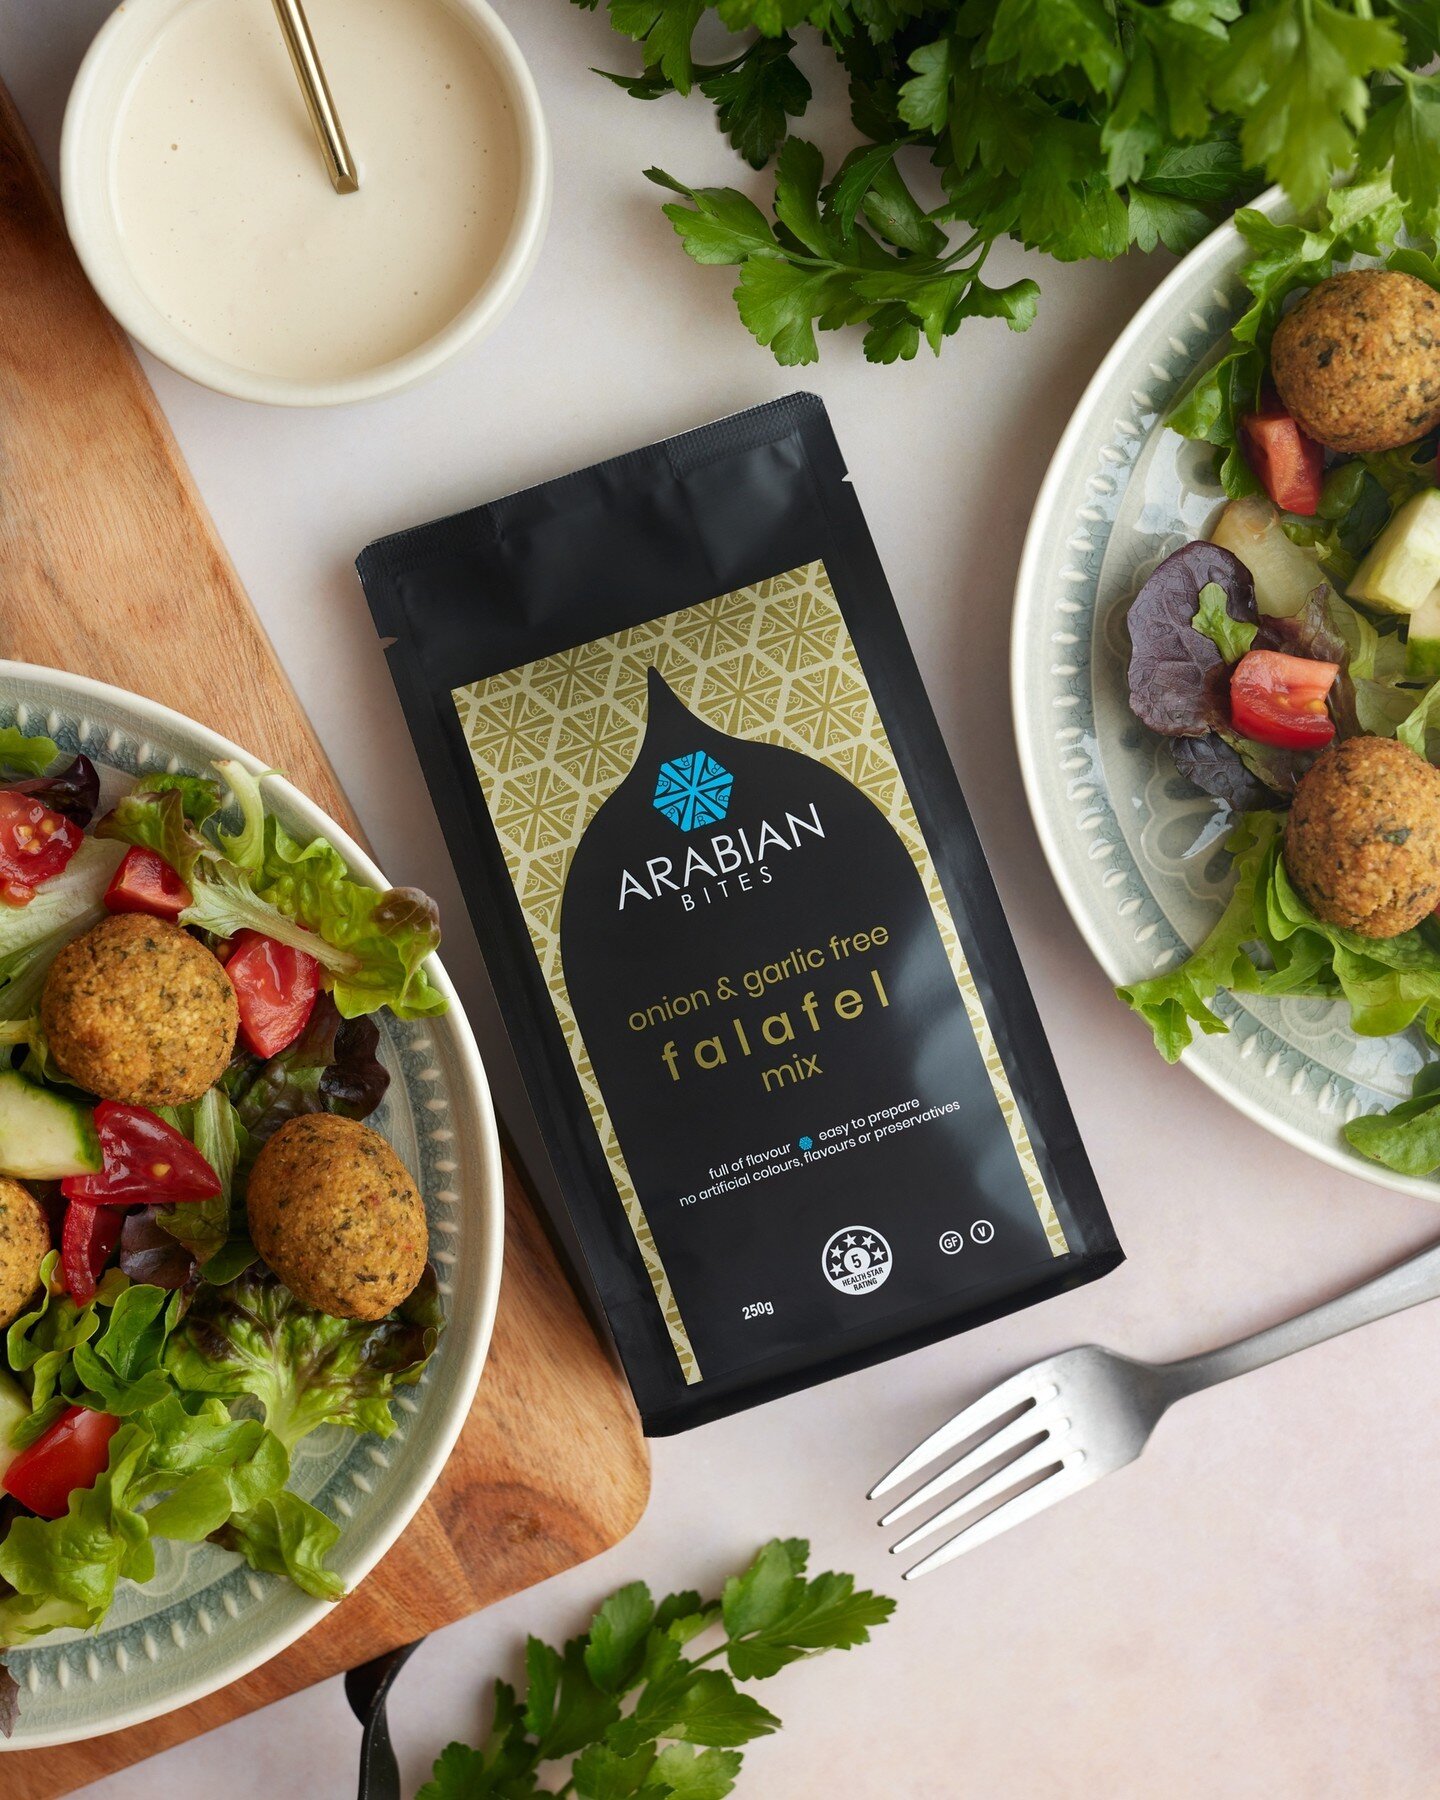 Know someone who chooses to steer clear of onion and garlic, but still loves REAL food with REAL flavour?⁠
⁠
Send them our way 🤗⁠
⁠
@arabianbites Onion &amp; Garlic Free Falafel Mixes - ready in minutes 😍⁠
⁠
⁠
⁠
⁠